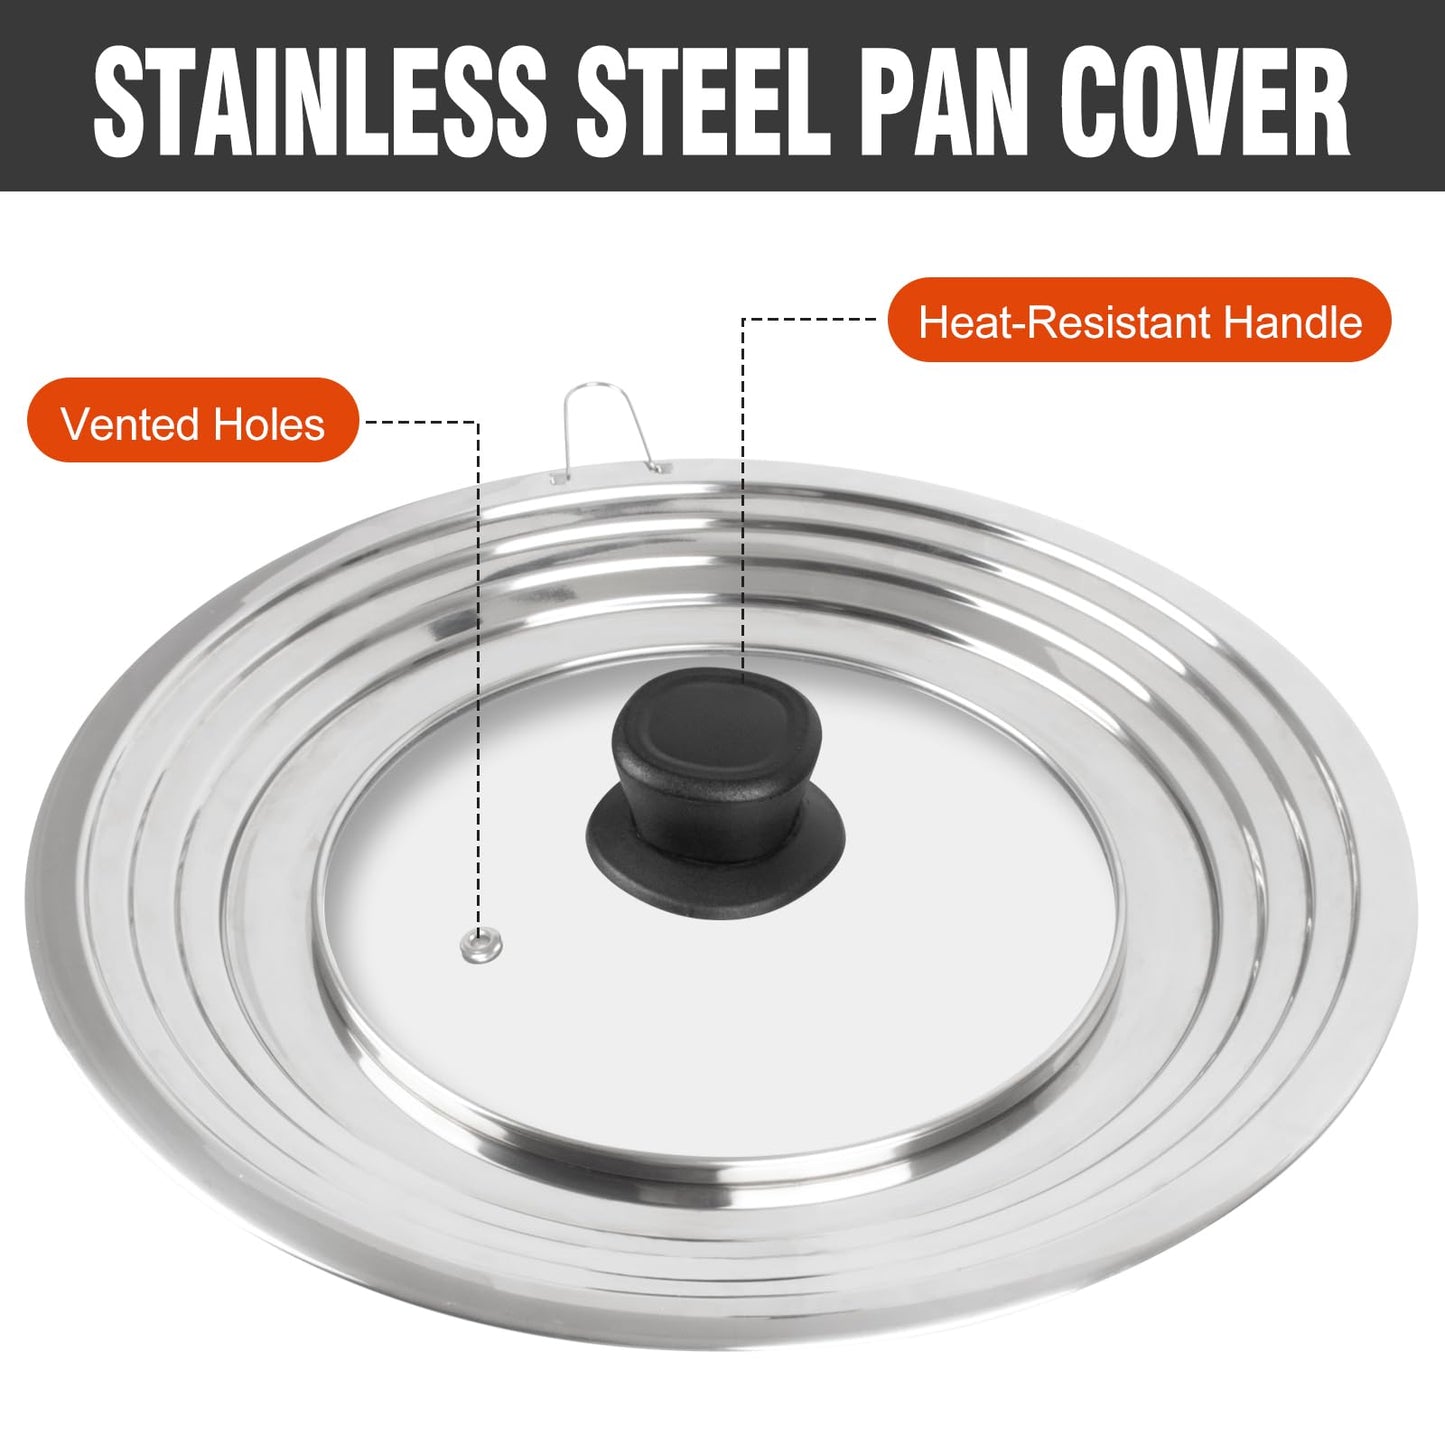 Universal Lid for Pots and Pans Skillets, Stainless Steel Pan Cover Fits 6-7-8 Inch Cookware, Large Replacement Frying Pan Cover, Cast Iron Skillet Pot Lids with Heat Resistant Knob